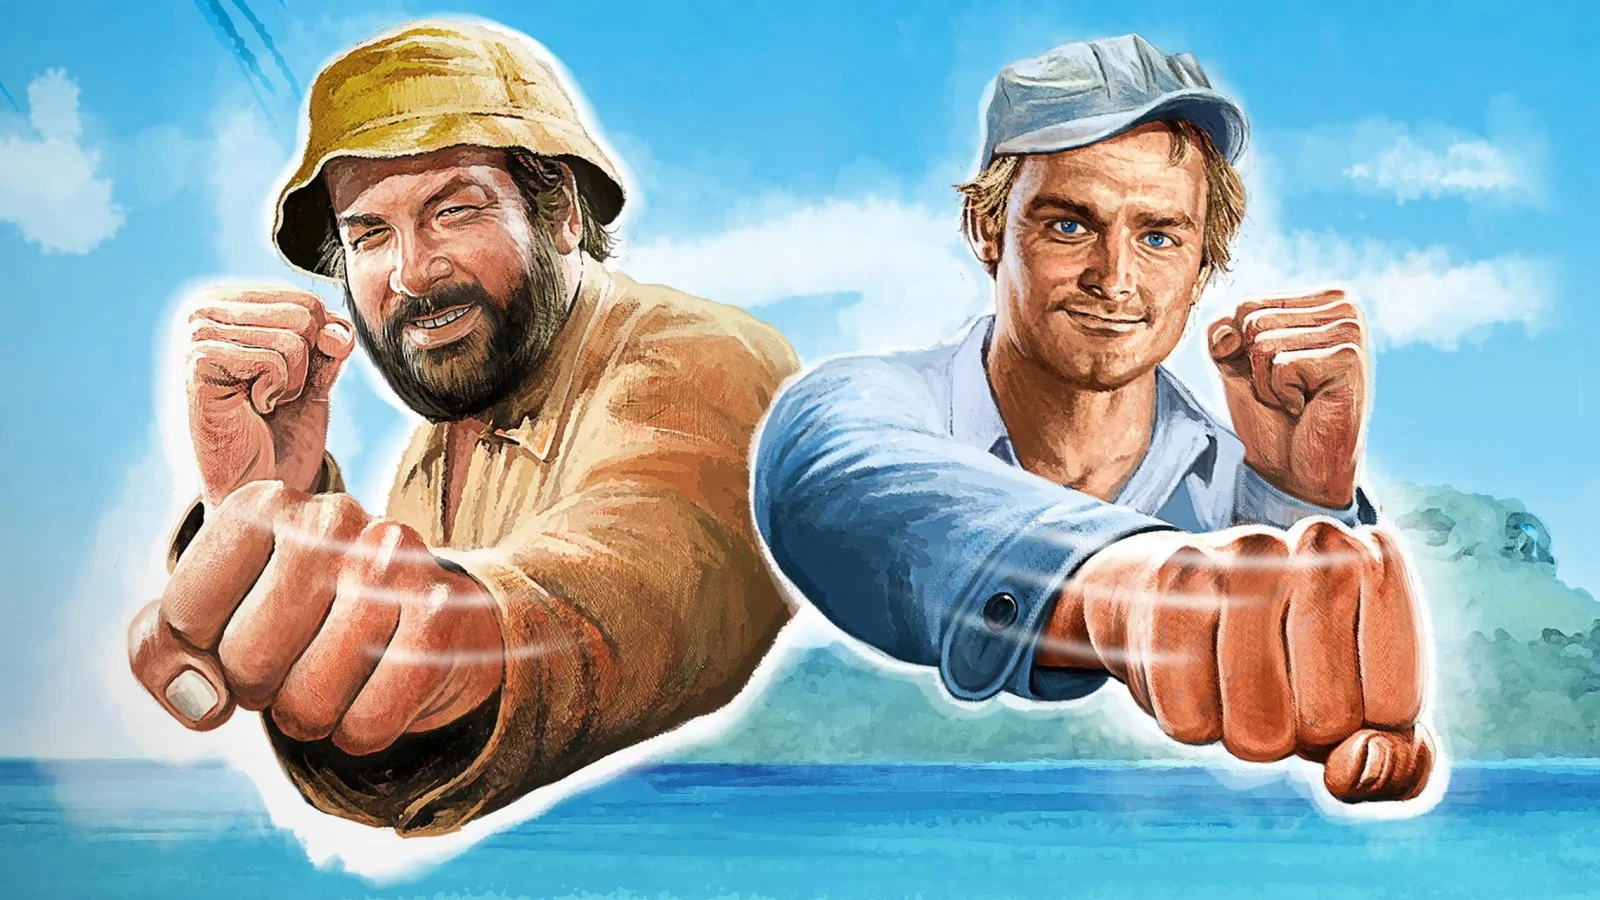 Review  Bud Spencer & Terence Hill - Slaps and Beans 2 - XboxEra